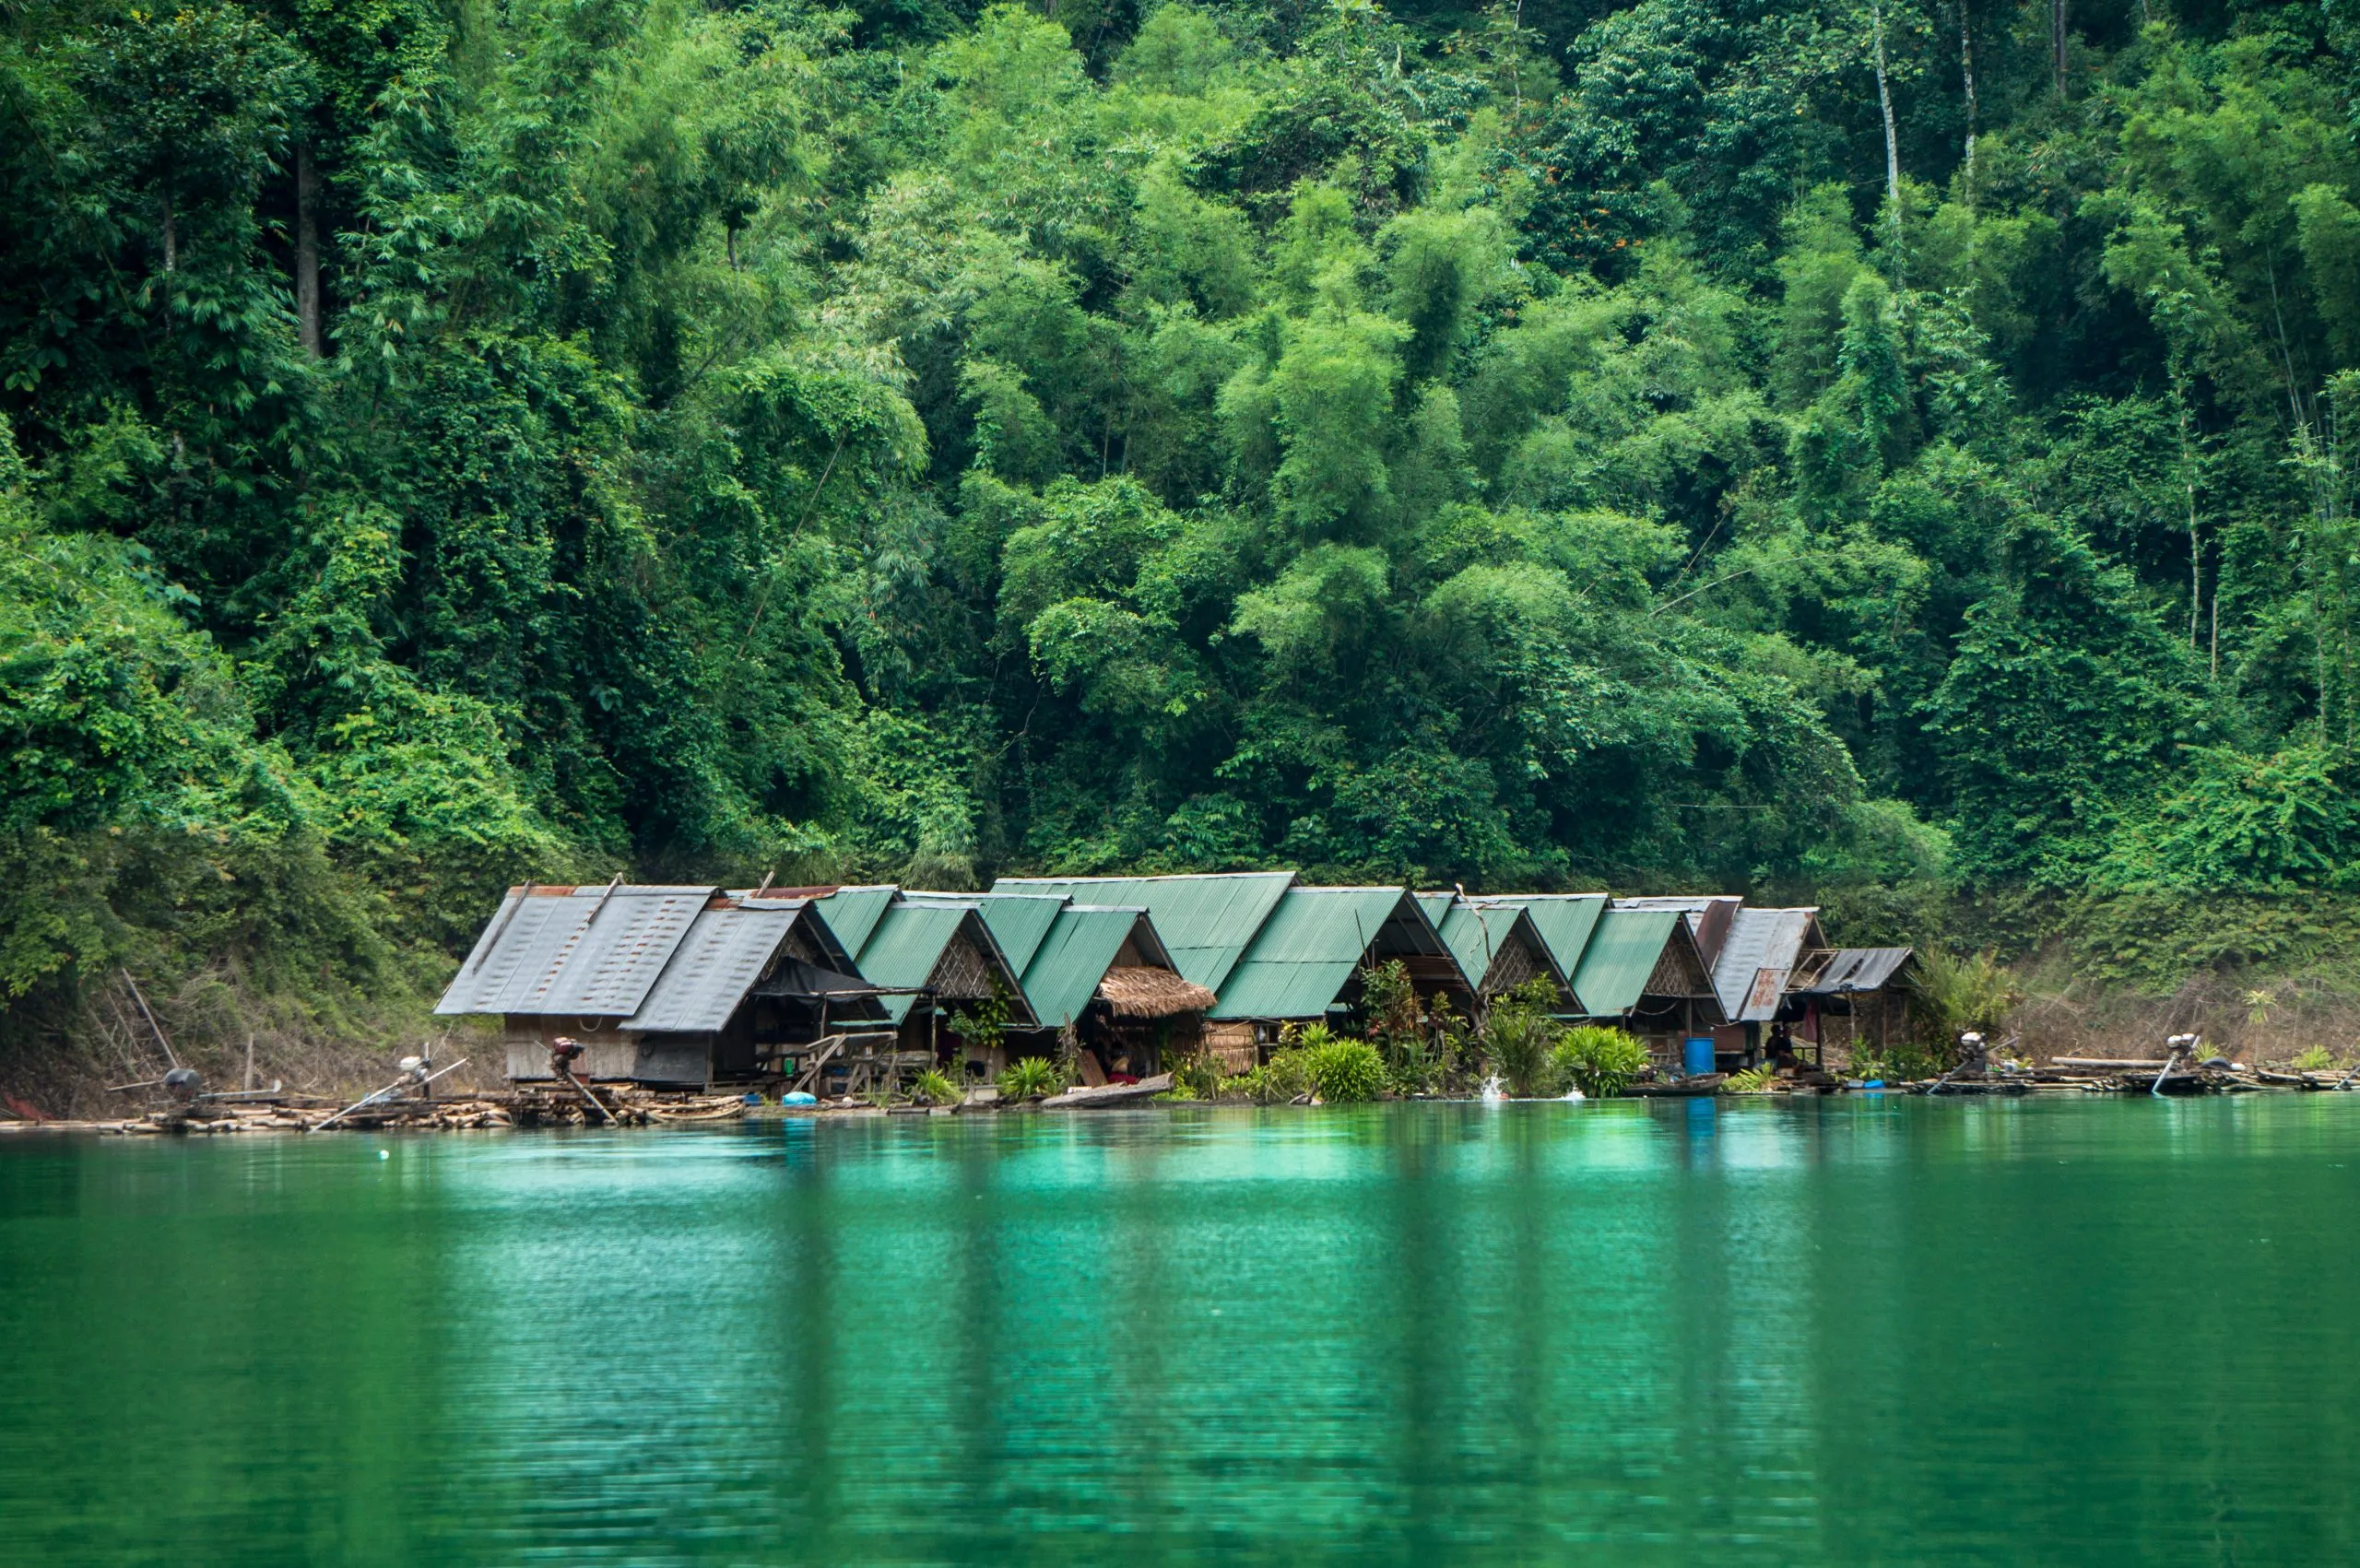 Small indigenous settlement on the banks of a river in the jungle